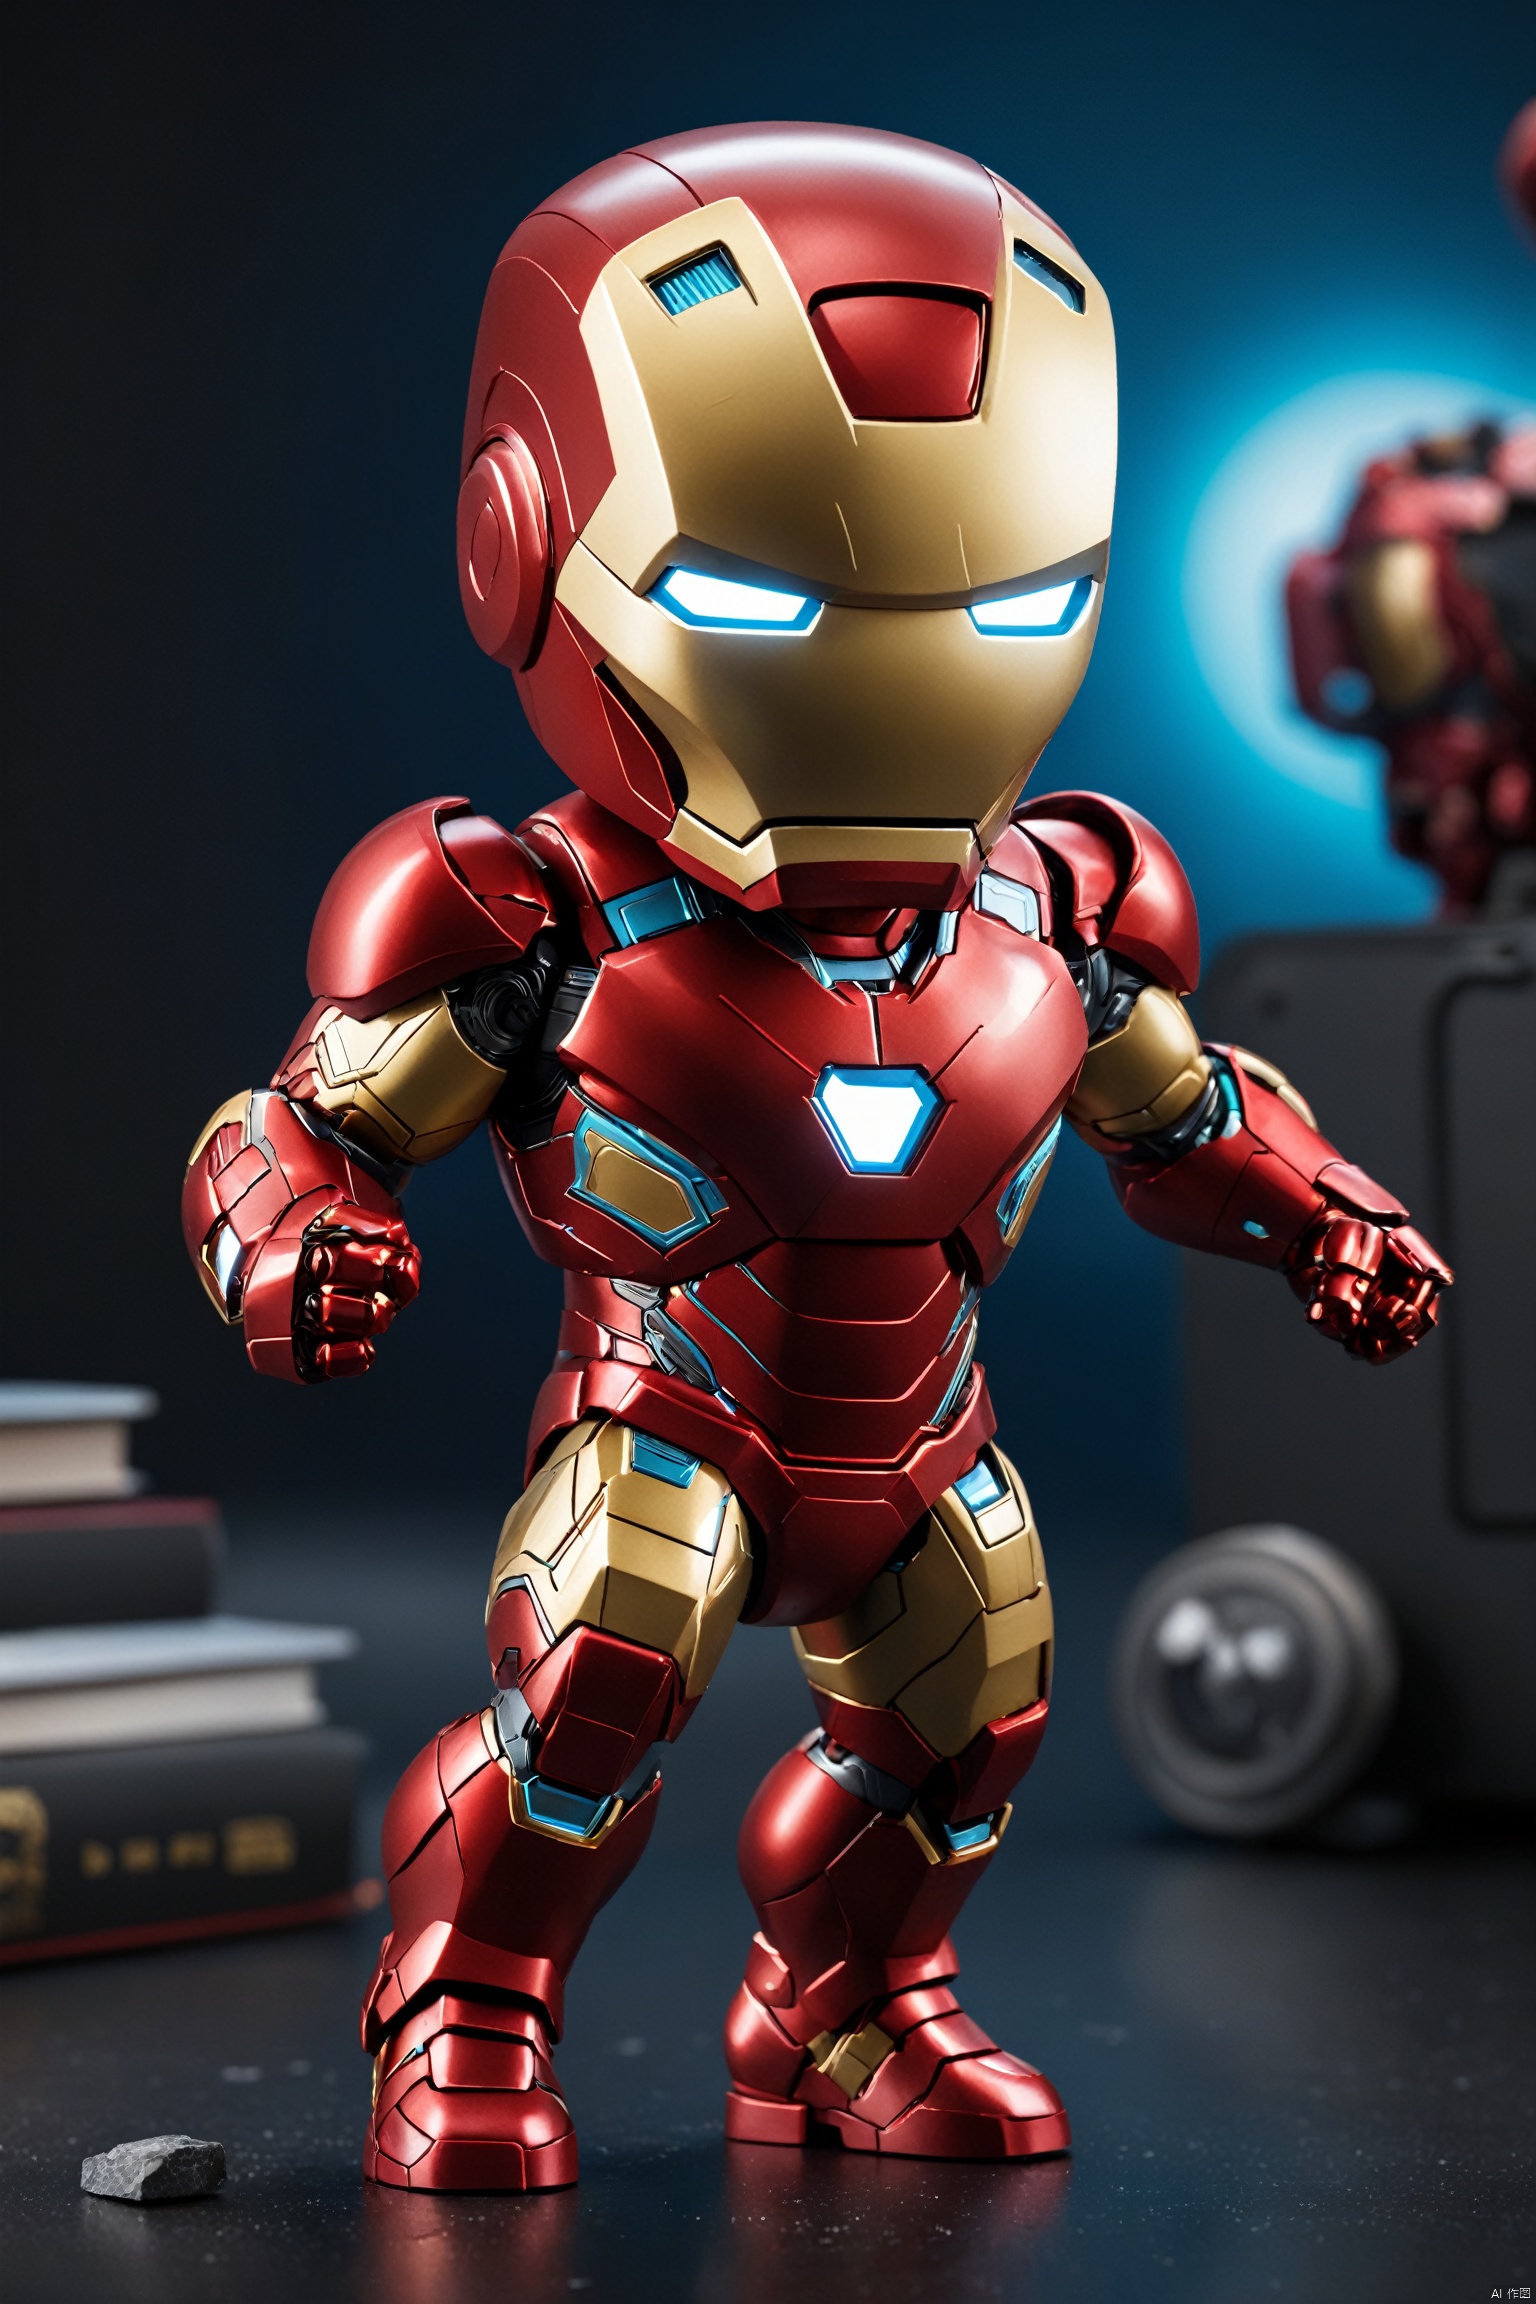 Photo, professional product photo, professional light, cinematic, perfect 3D Model of a Chibi Marvel superheroes (such as Iron Man, cute background, high detail, realistic, Canon EOS R5
many details, extreme detailed, full of details,
Wide range of colors. Insane quality. Insane resolution. Insane details. Masterpiece. 32k resolution.